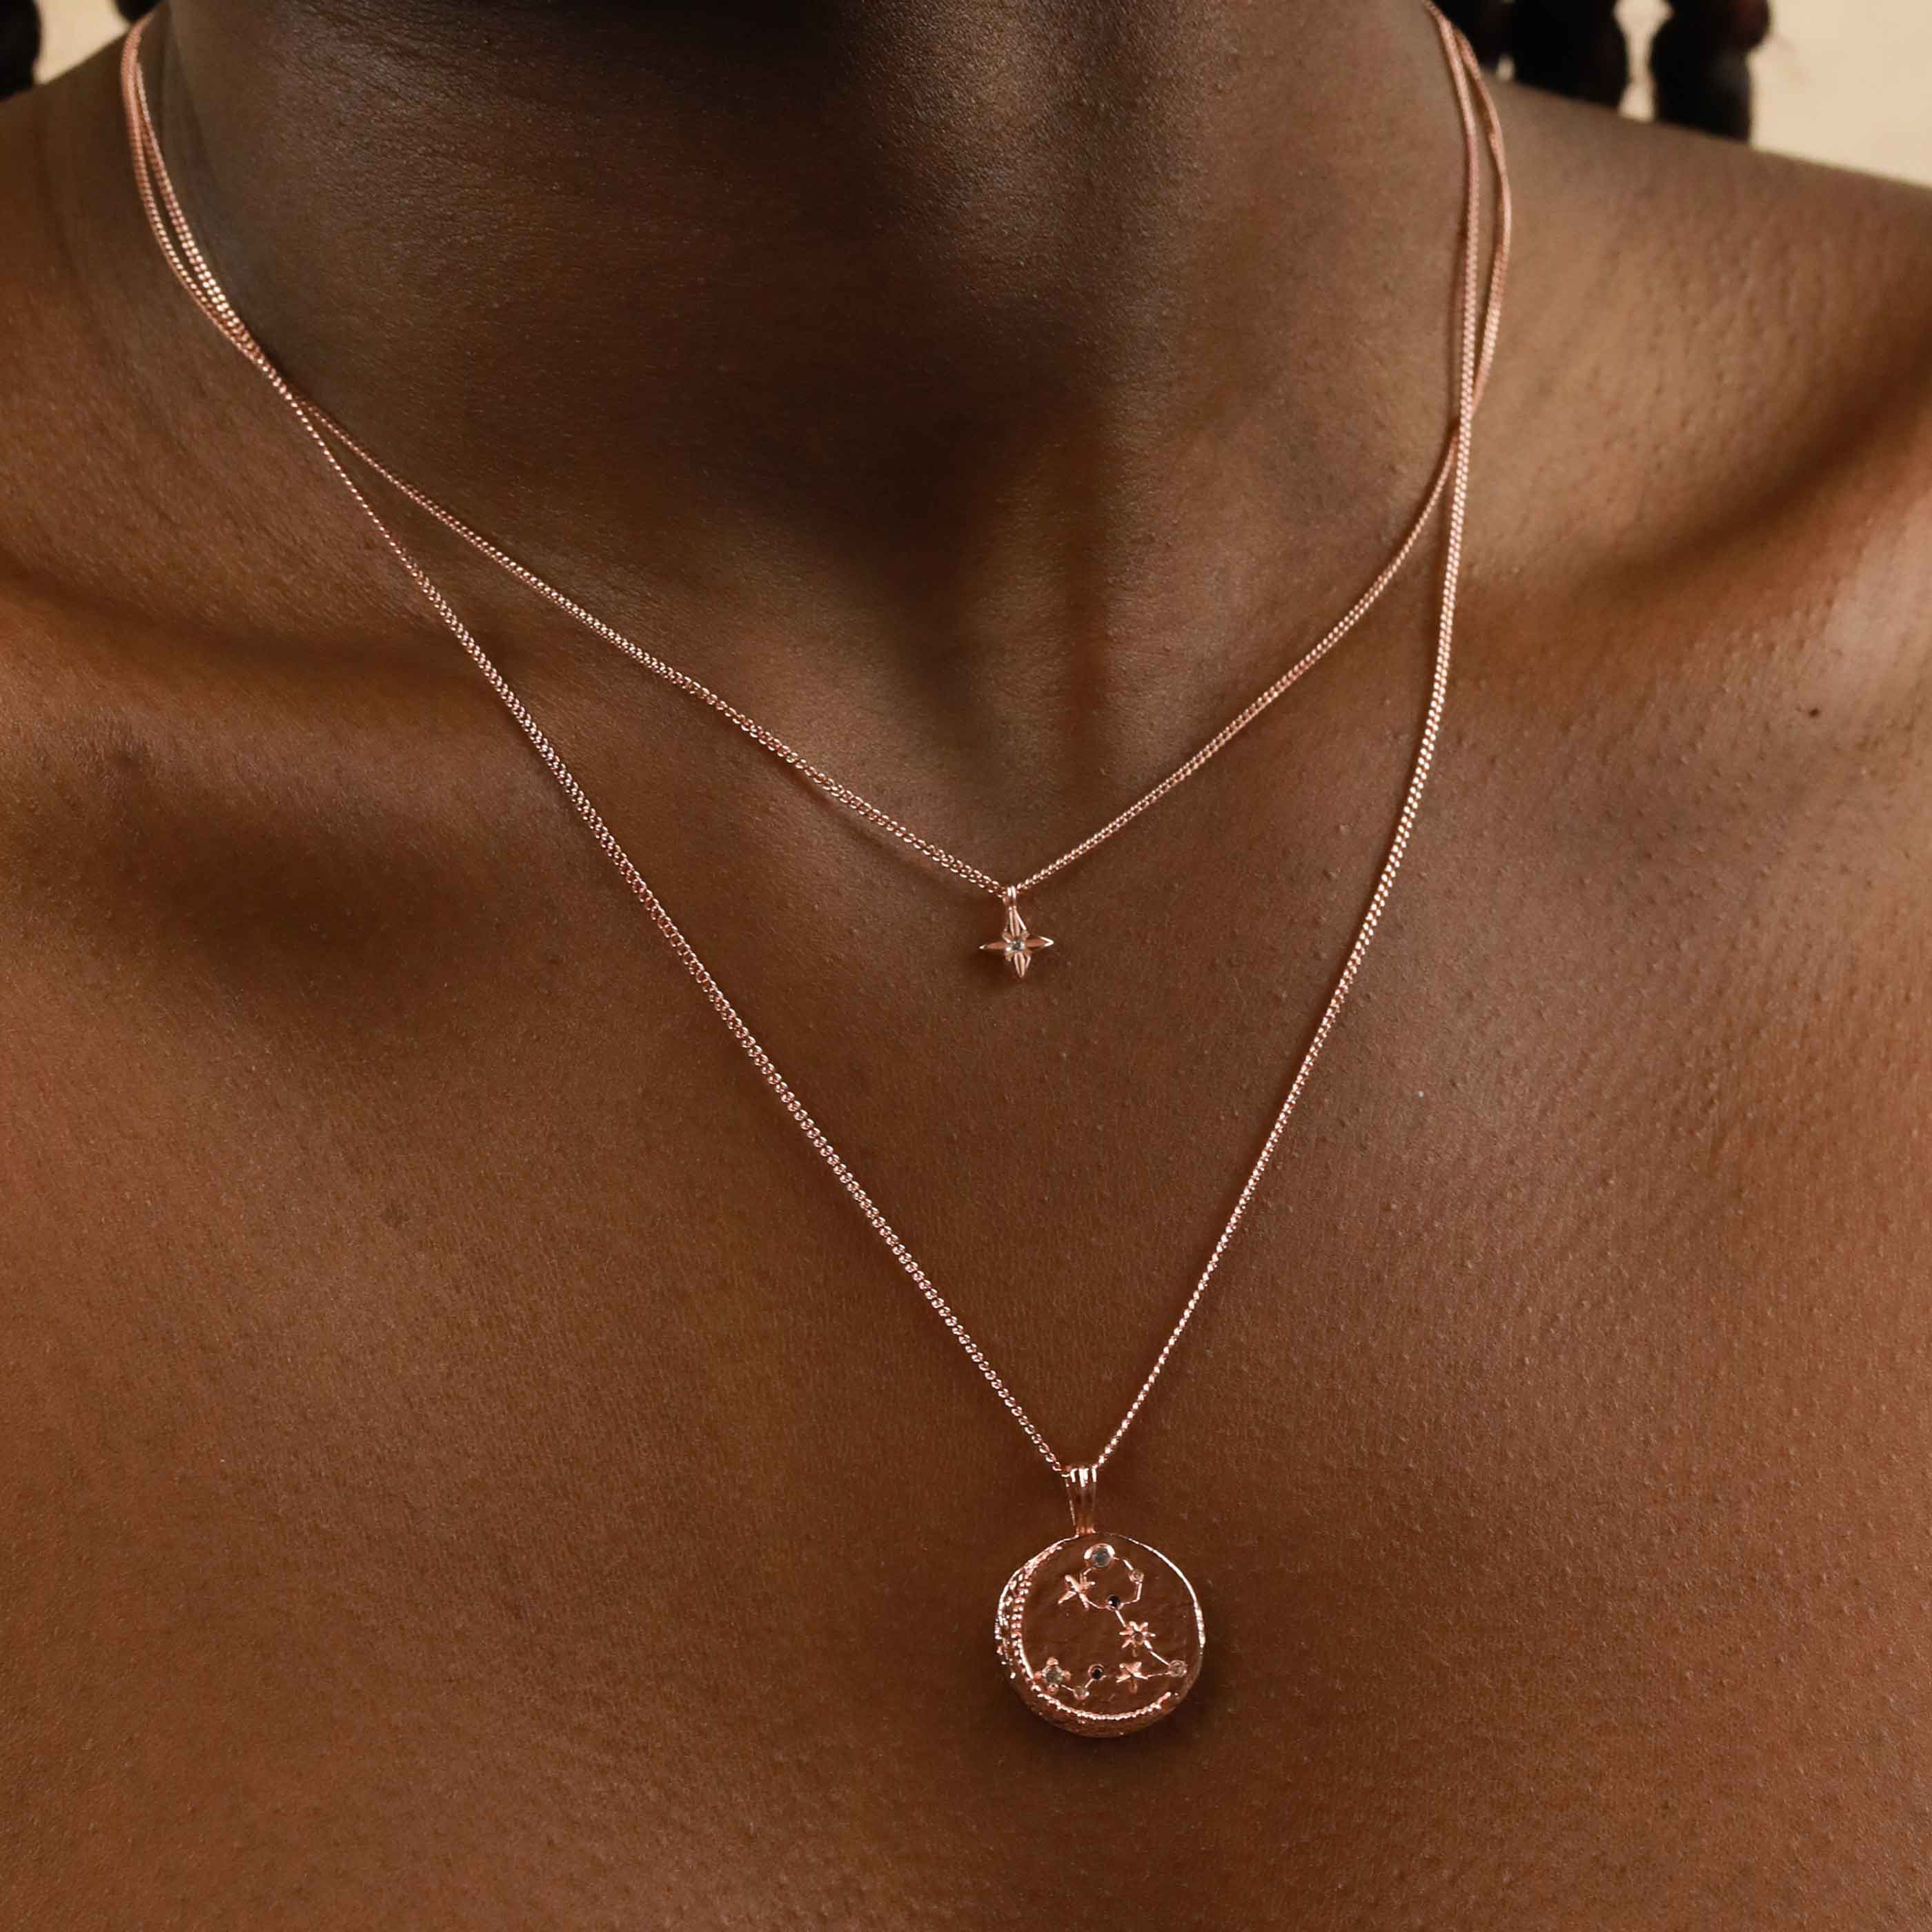 Pisces Zodiac Pendant Necklace in Rose Gold